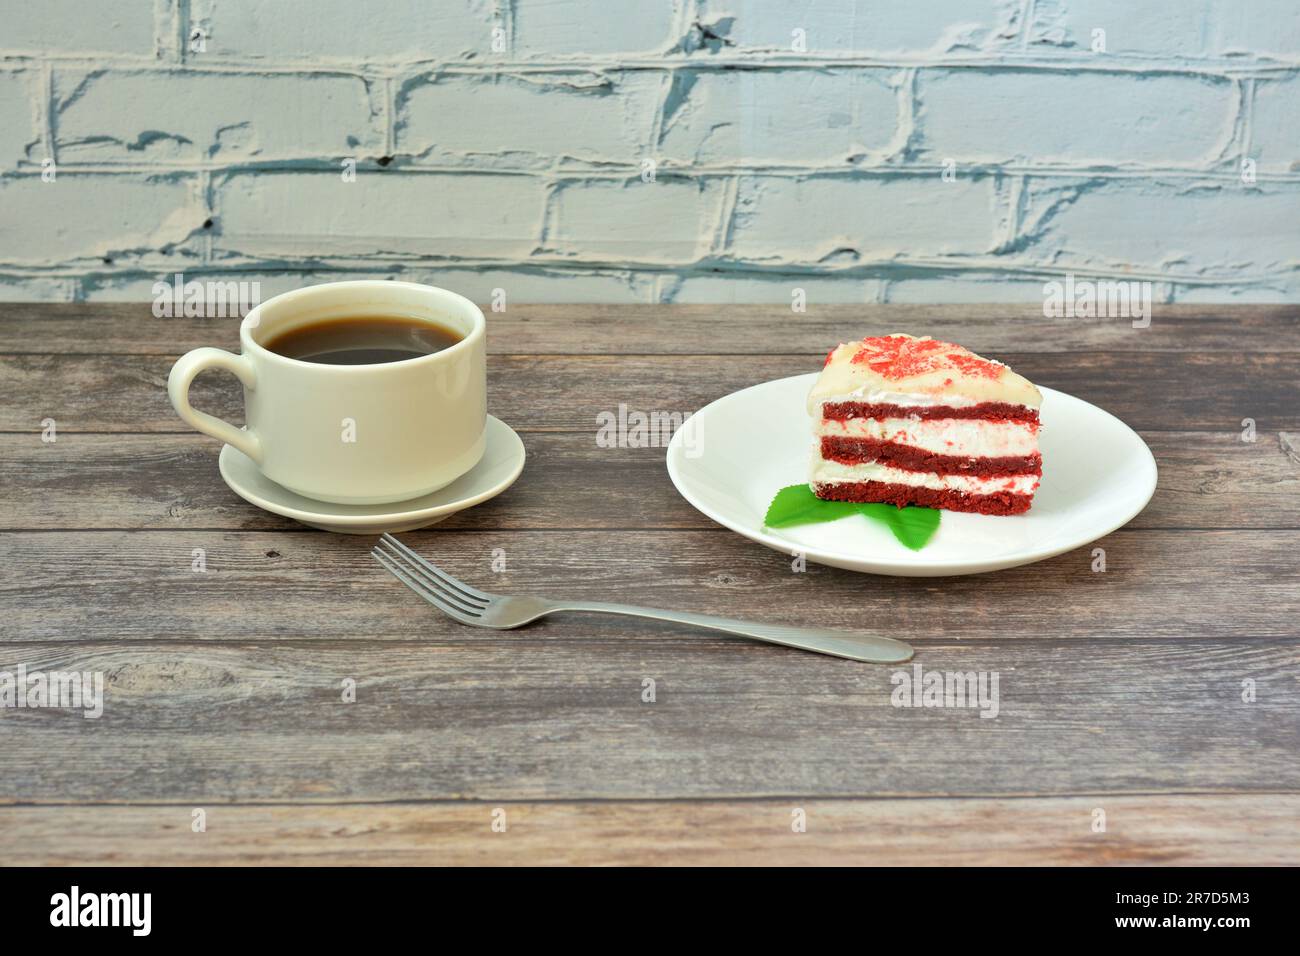 A cup of hot black coffee on a saucer and a plate with a piece of red velvet cake on a light wooden table. Close-up. Stock Photo